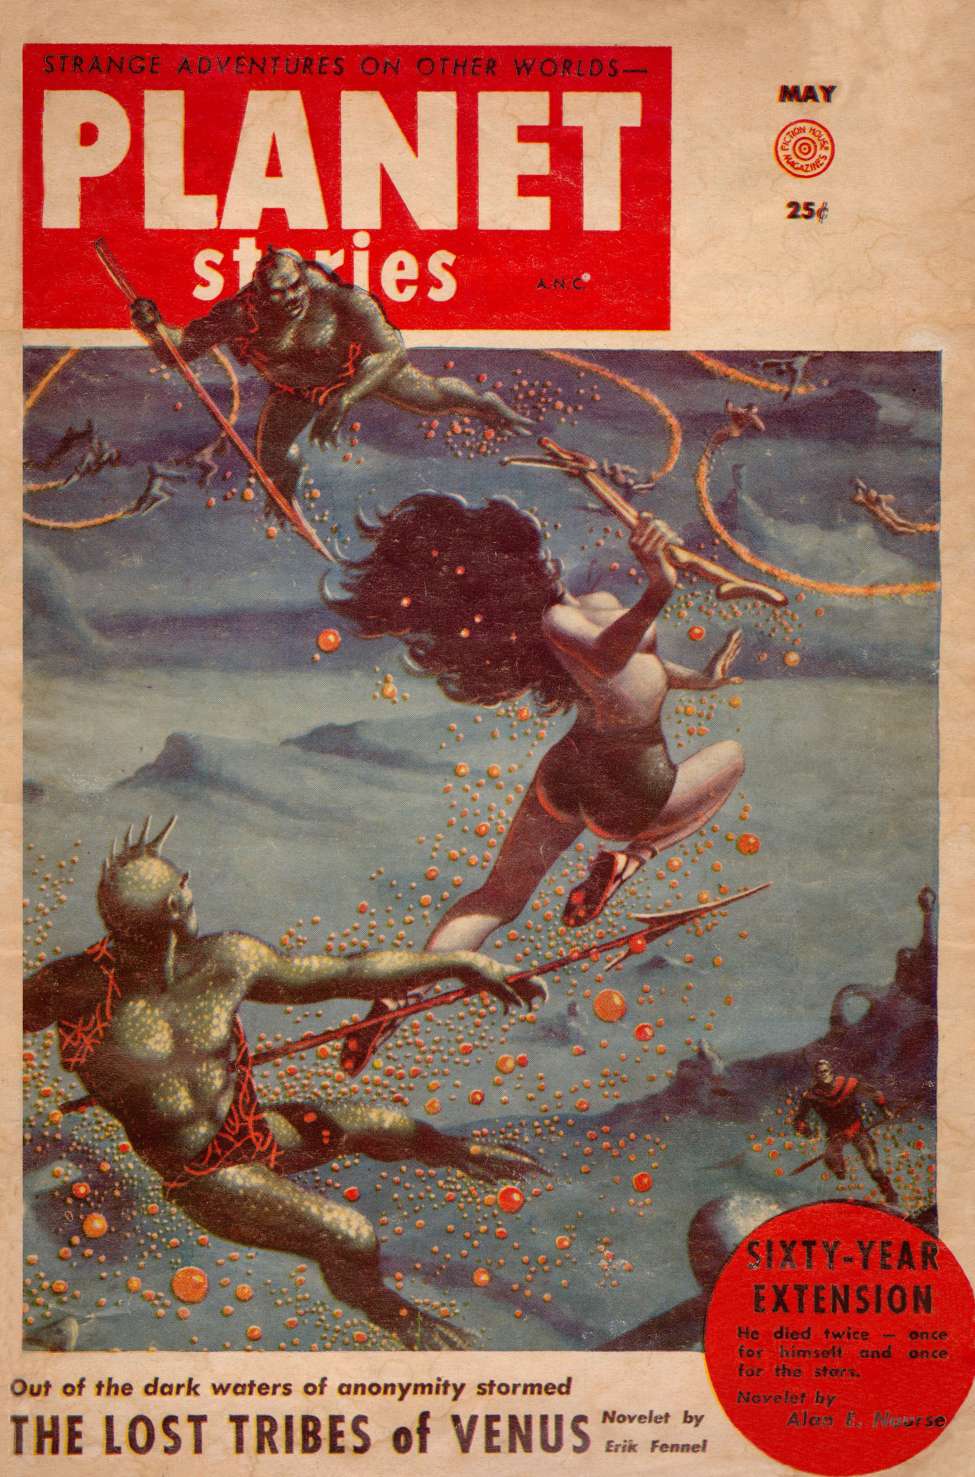 Comic Book Cover For Planet Stories v6 6 - The Lost Tribes of Venus - Erik Fennel